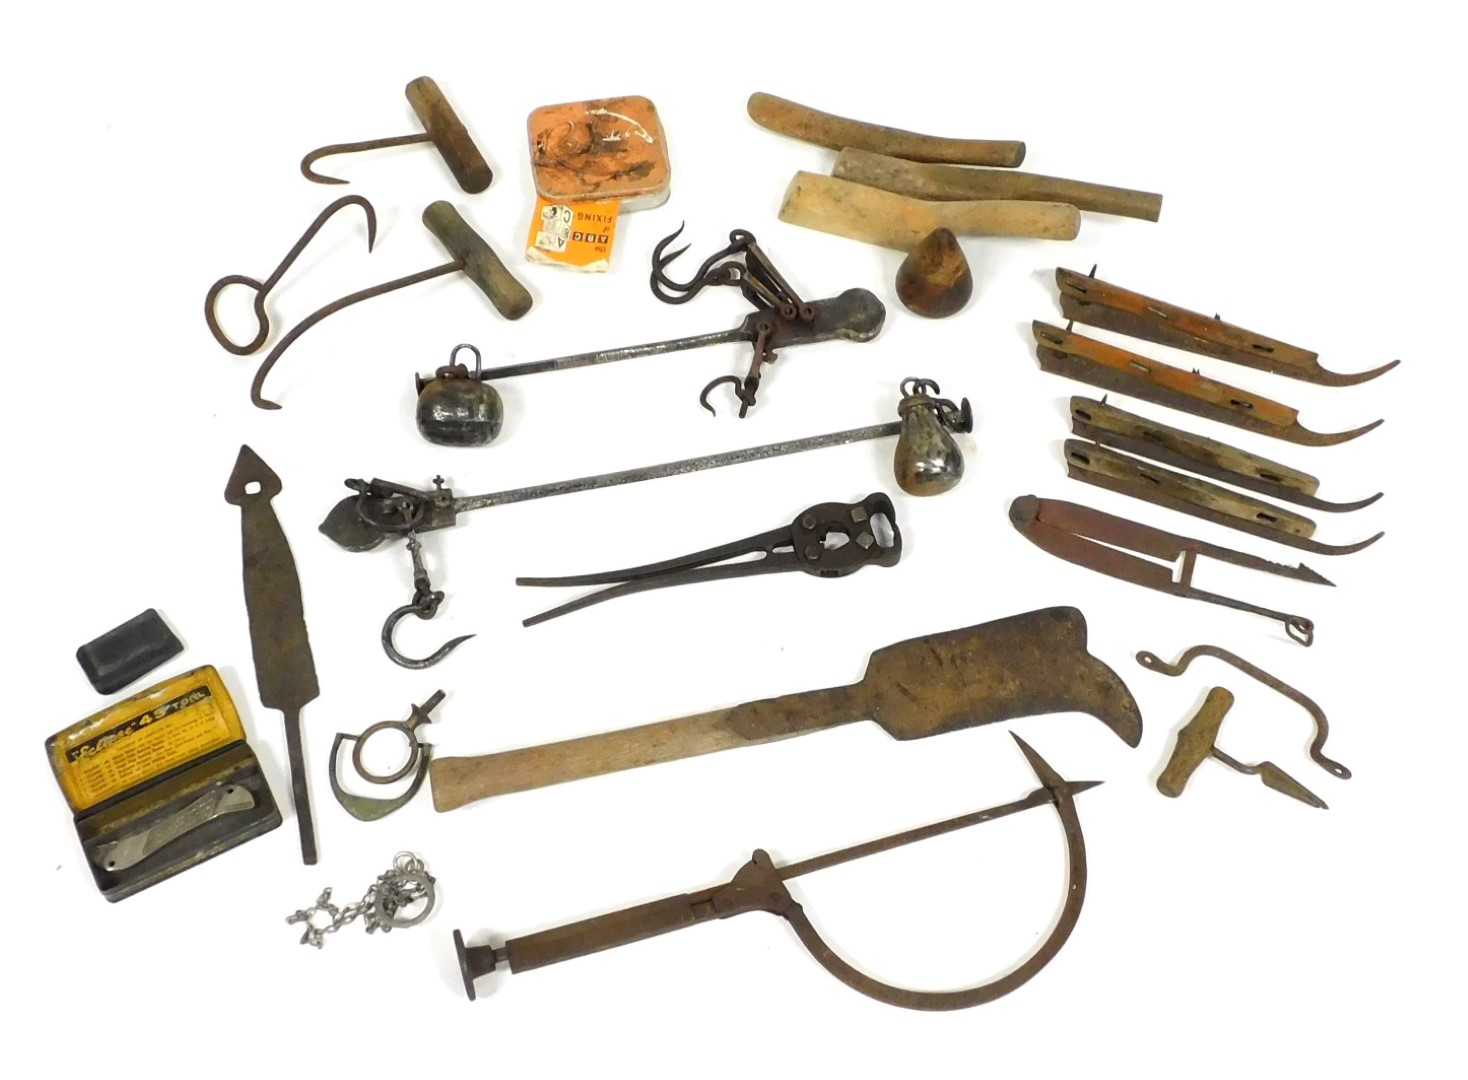 Assorted vintage tools, including a thatcher's needle, vintage wire cutters, cast iron sliding scale